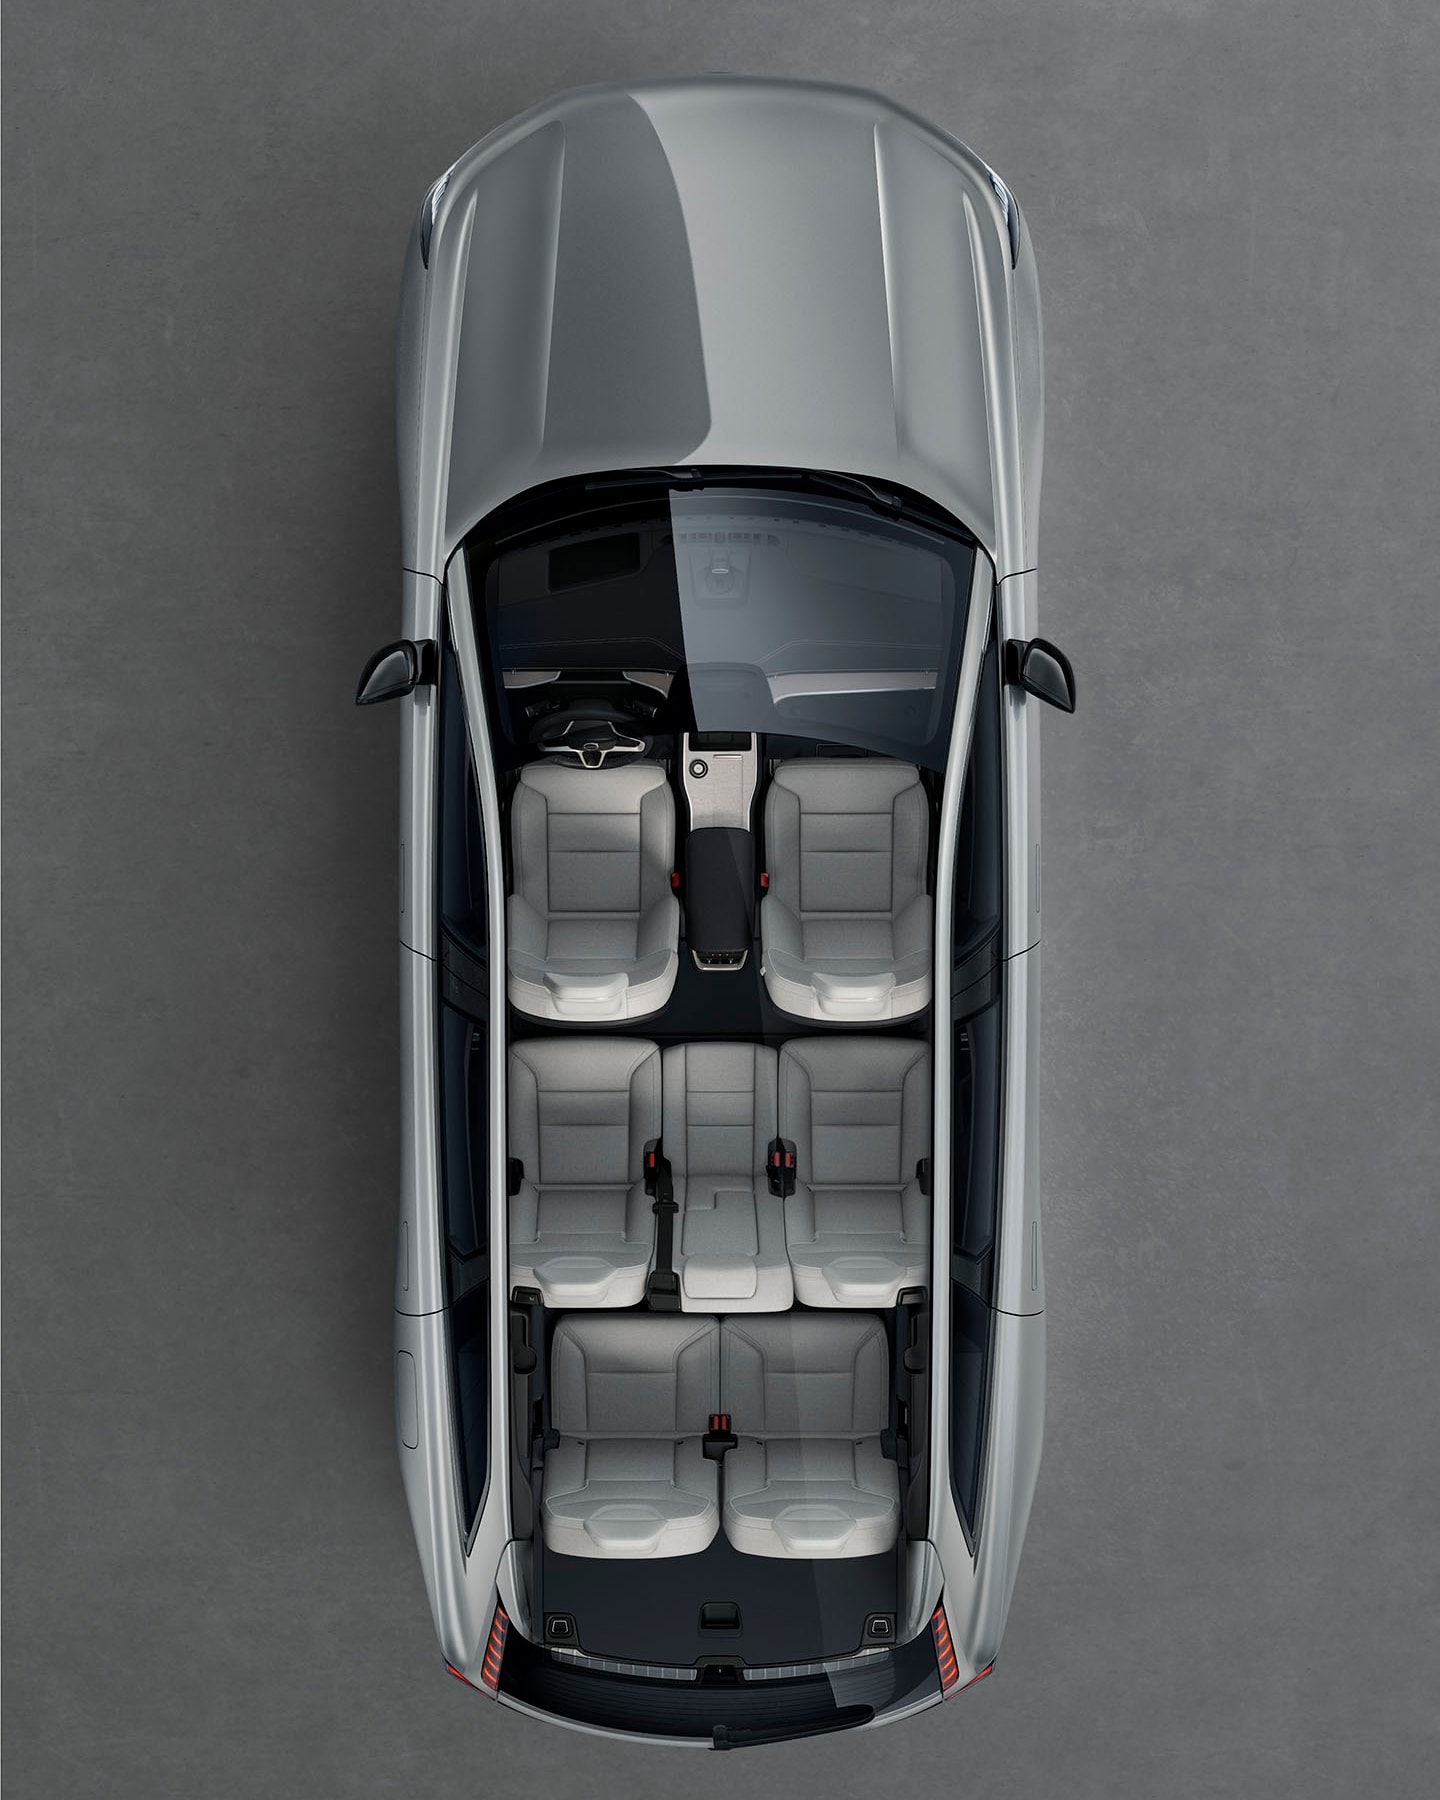 The 7-seat cabin in a Volvo EX90 from above.